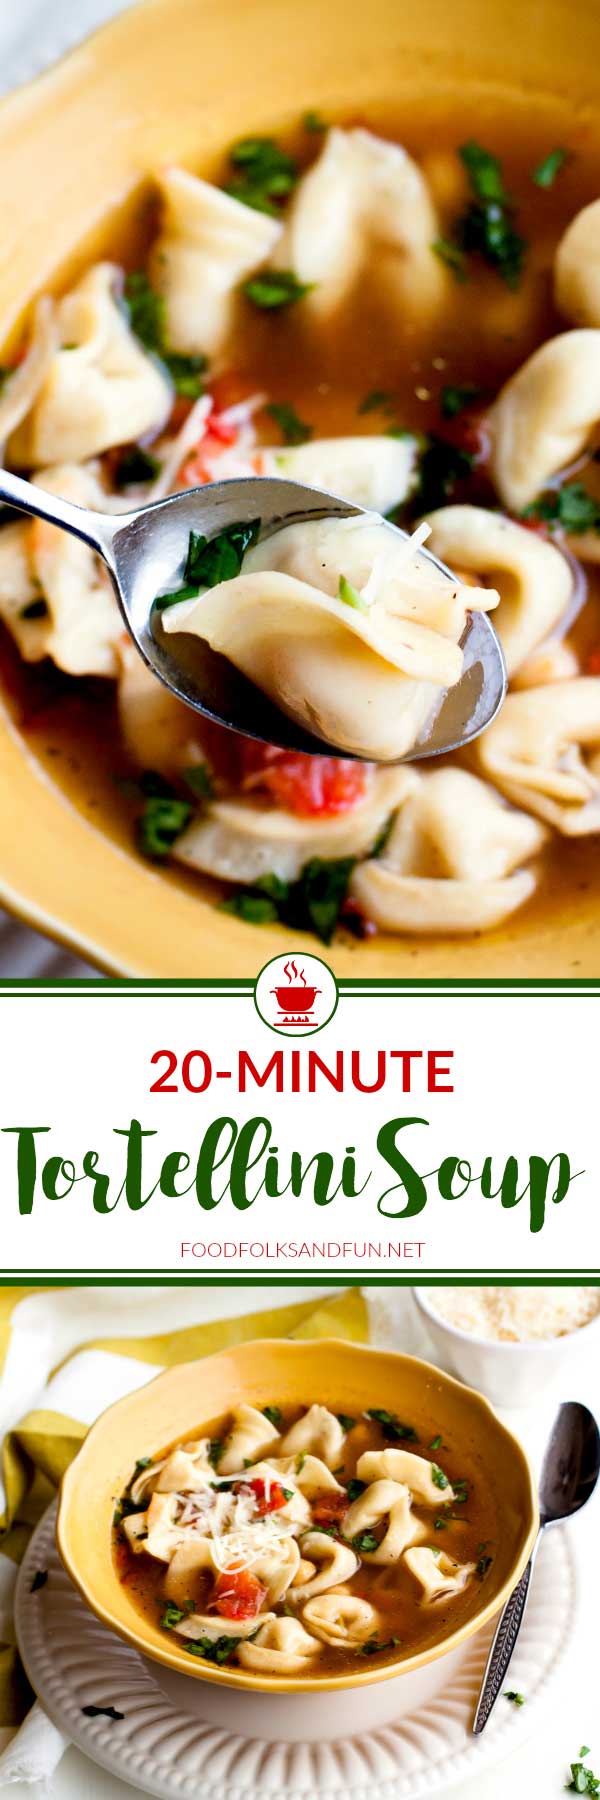 20-Minute Tortellini Soup is a great cold-weather recipe for easy weeknight dinners. It’s not only delicious and easy to make, but it’s also economical, too! via @foodfolksandfun